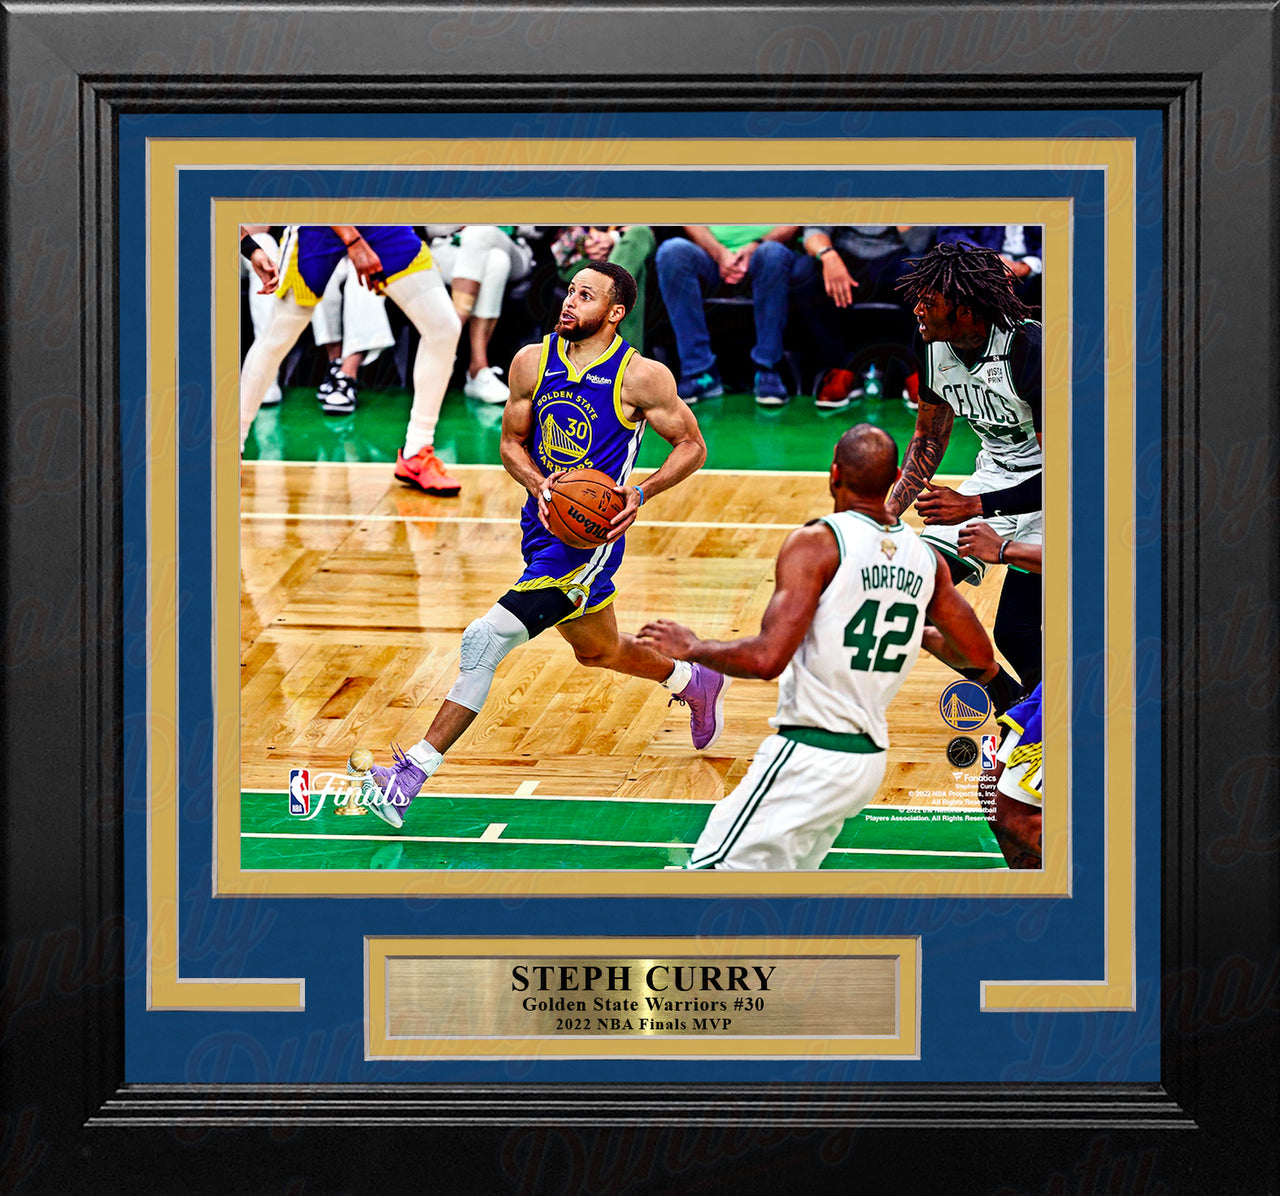 Steph Curry 2022 NBA Finals Action Golden State Warriors 8" x 10" Framed Basketball Photo - Dynasty Sports & Framing 